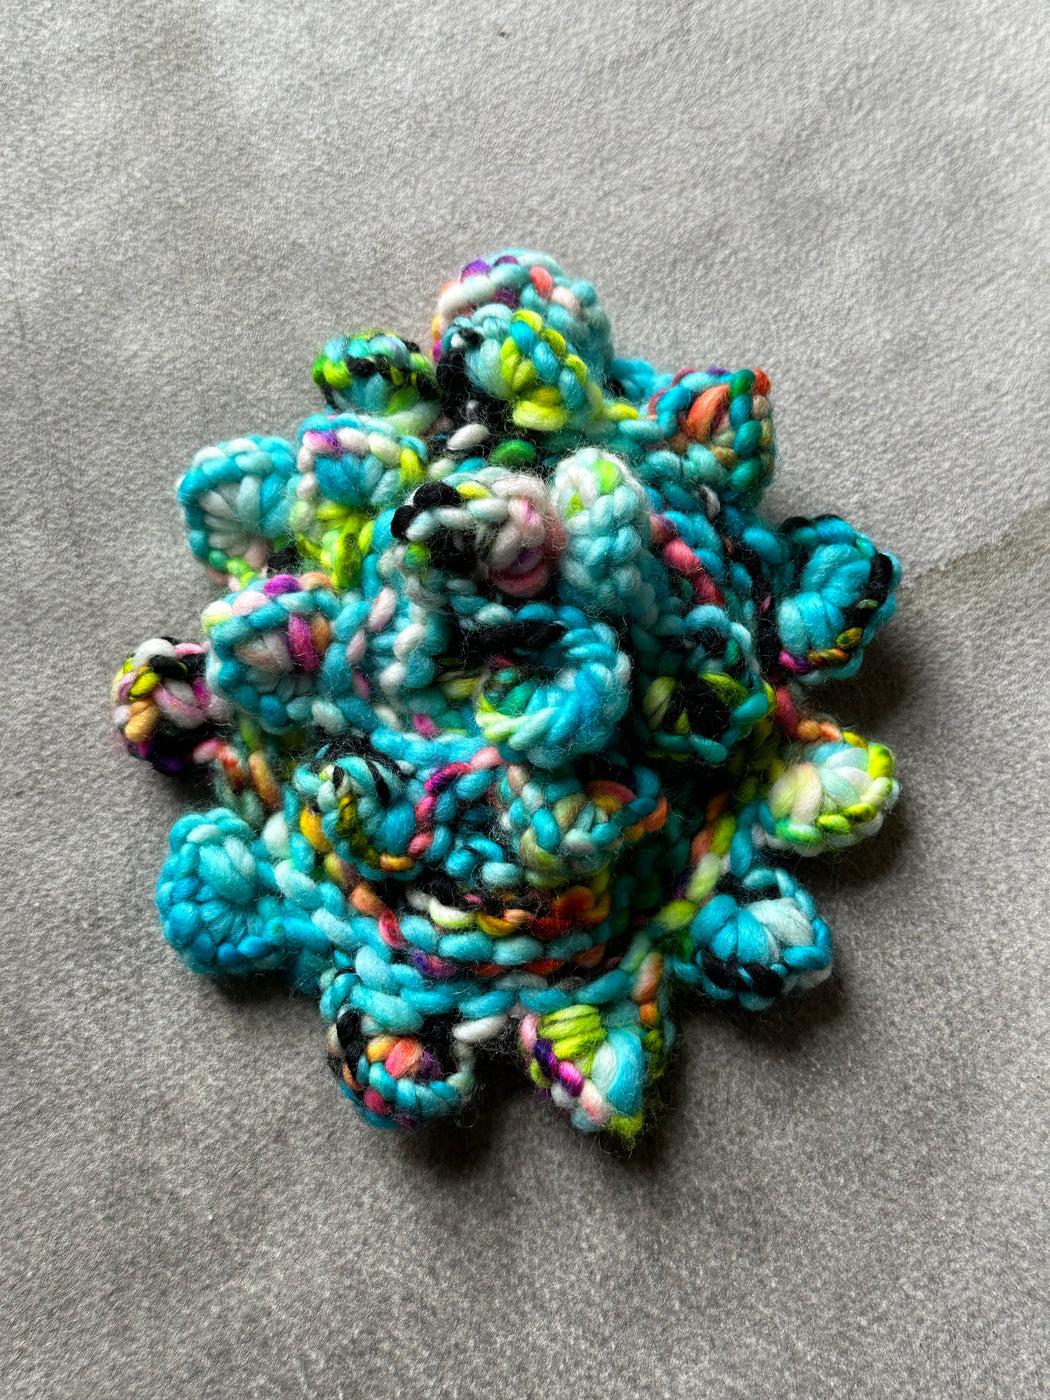 Large "Camelia" Hand-Knitted Brooch by Albo - Blue